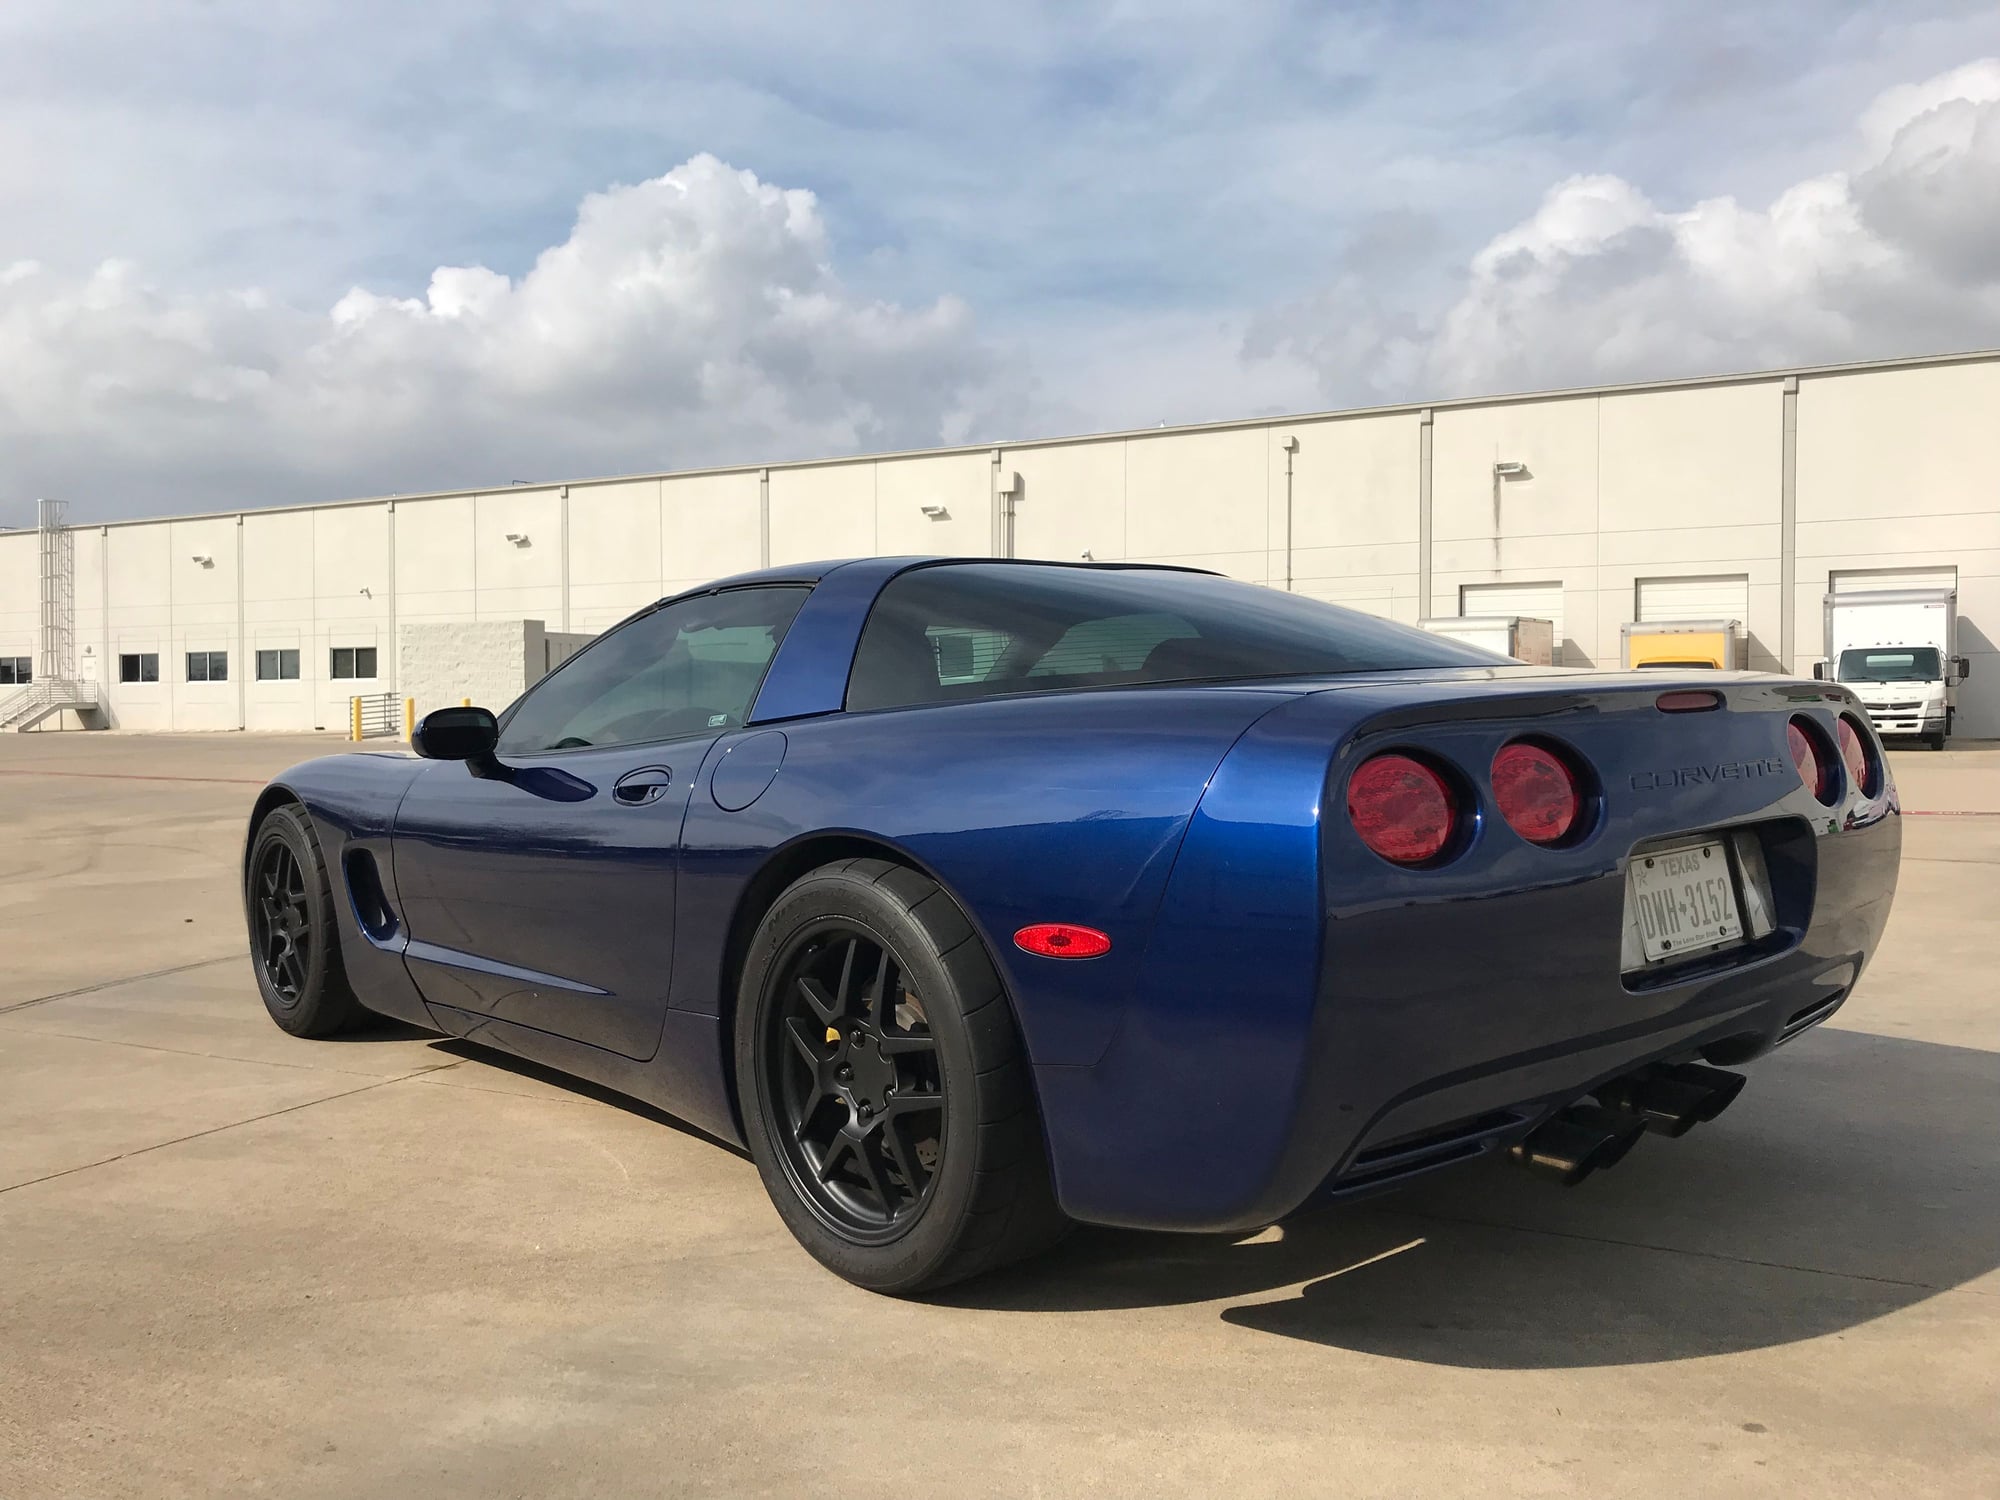 2004 Chevrolet Corvette - 2004 Chevy Corvette commemorative edition Z51 - Used - VIN 1G1YY22G345110978 - 89,000 Miles - 8 cyl - 2WD - Manual - Coupe - Blue - Houston, TX 77449, United States